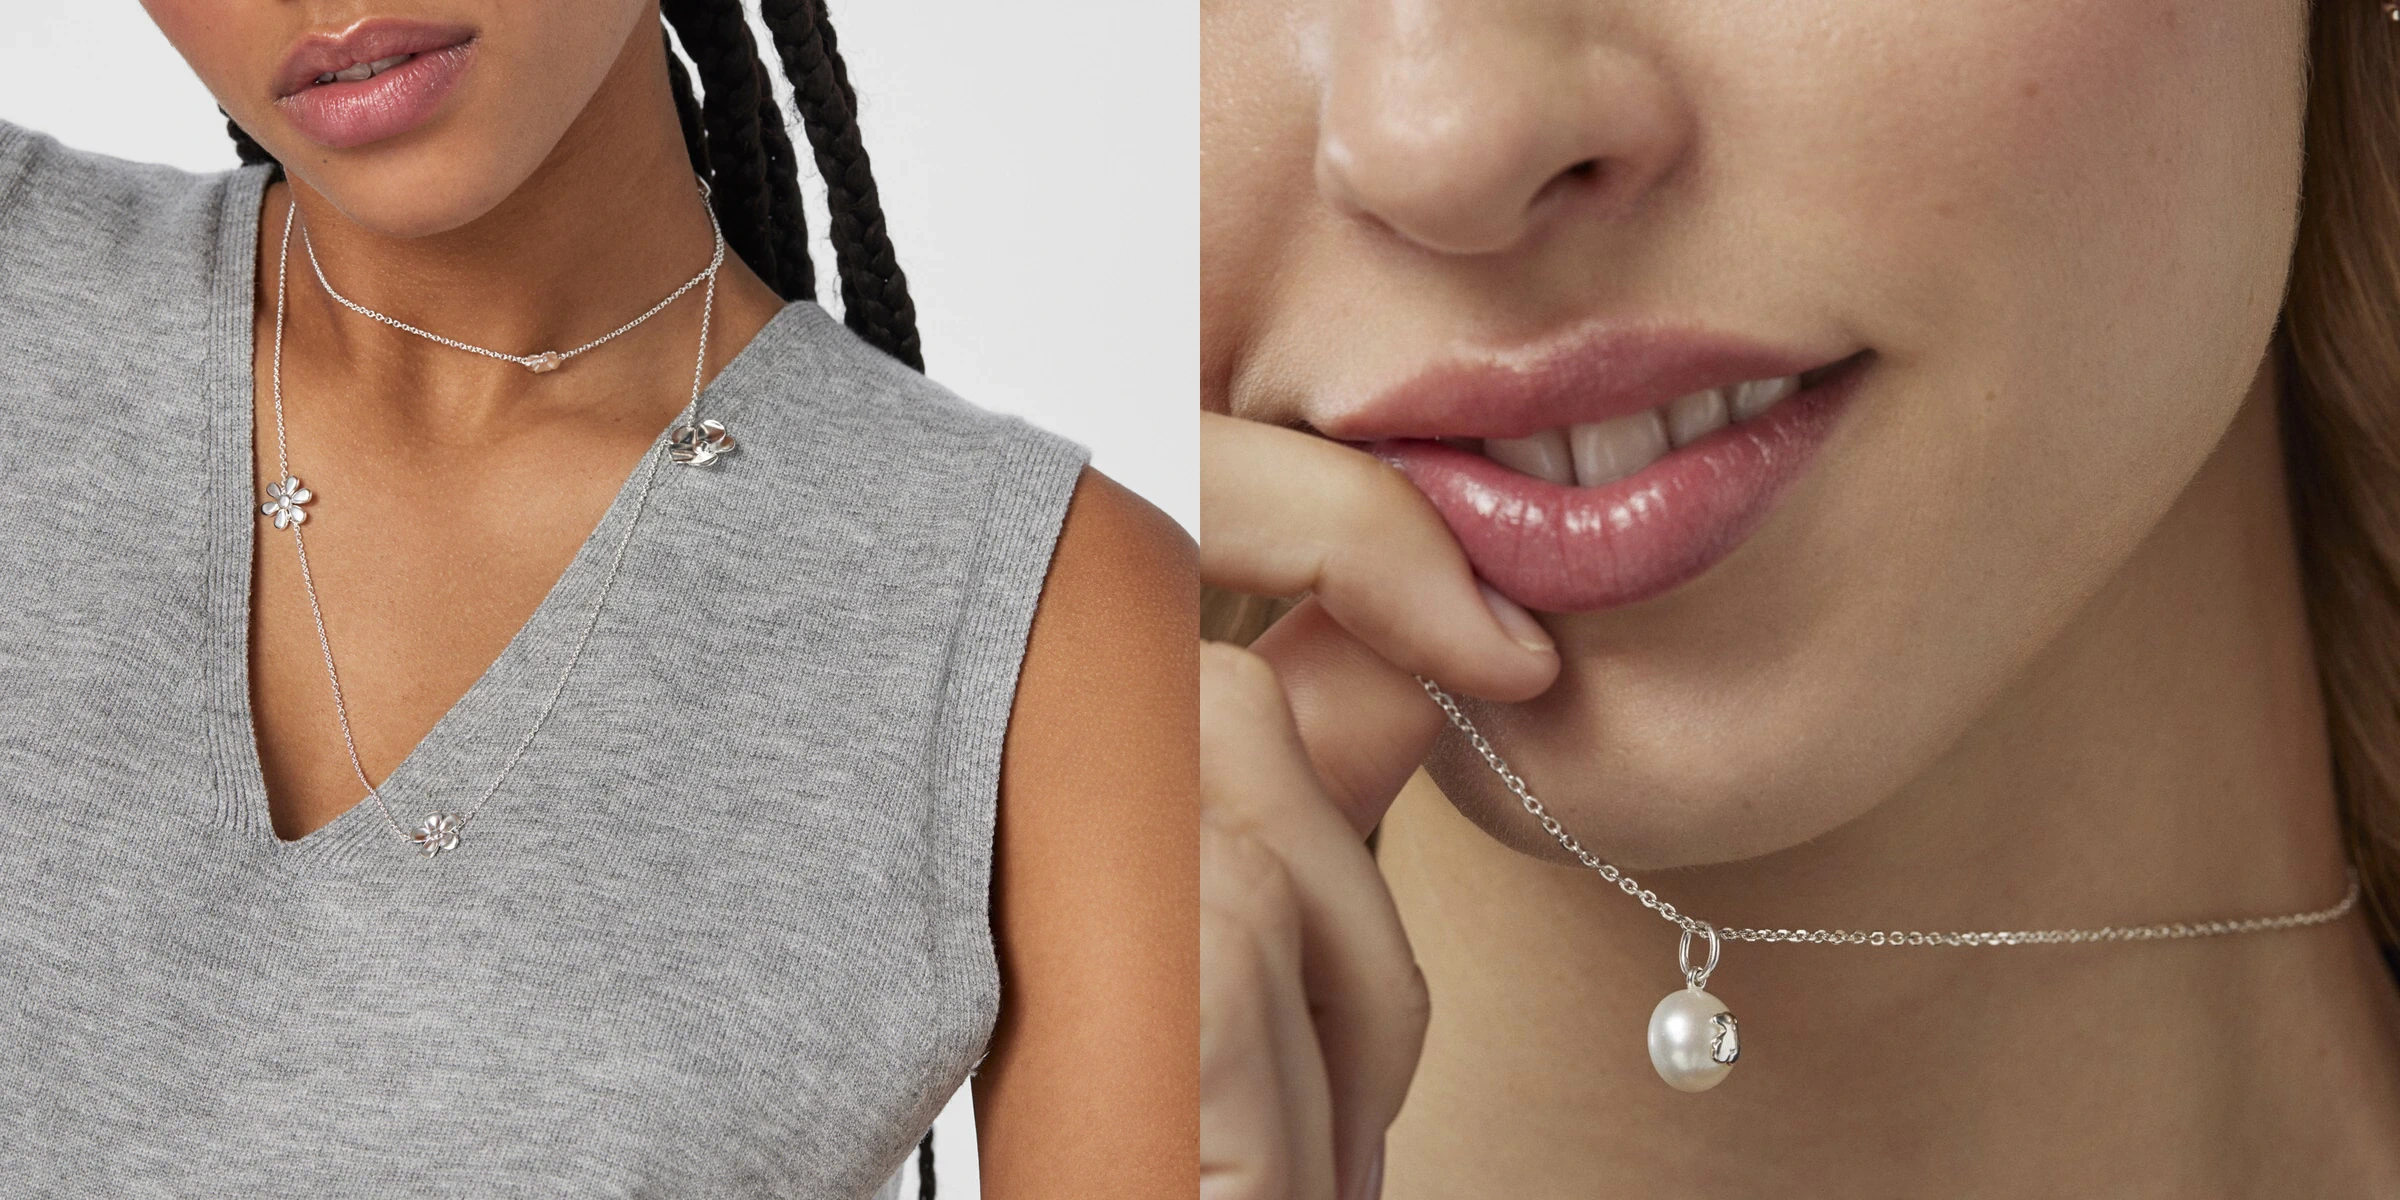 Silver necklace for women: why is it a perfect accessory?